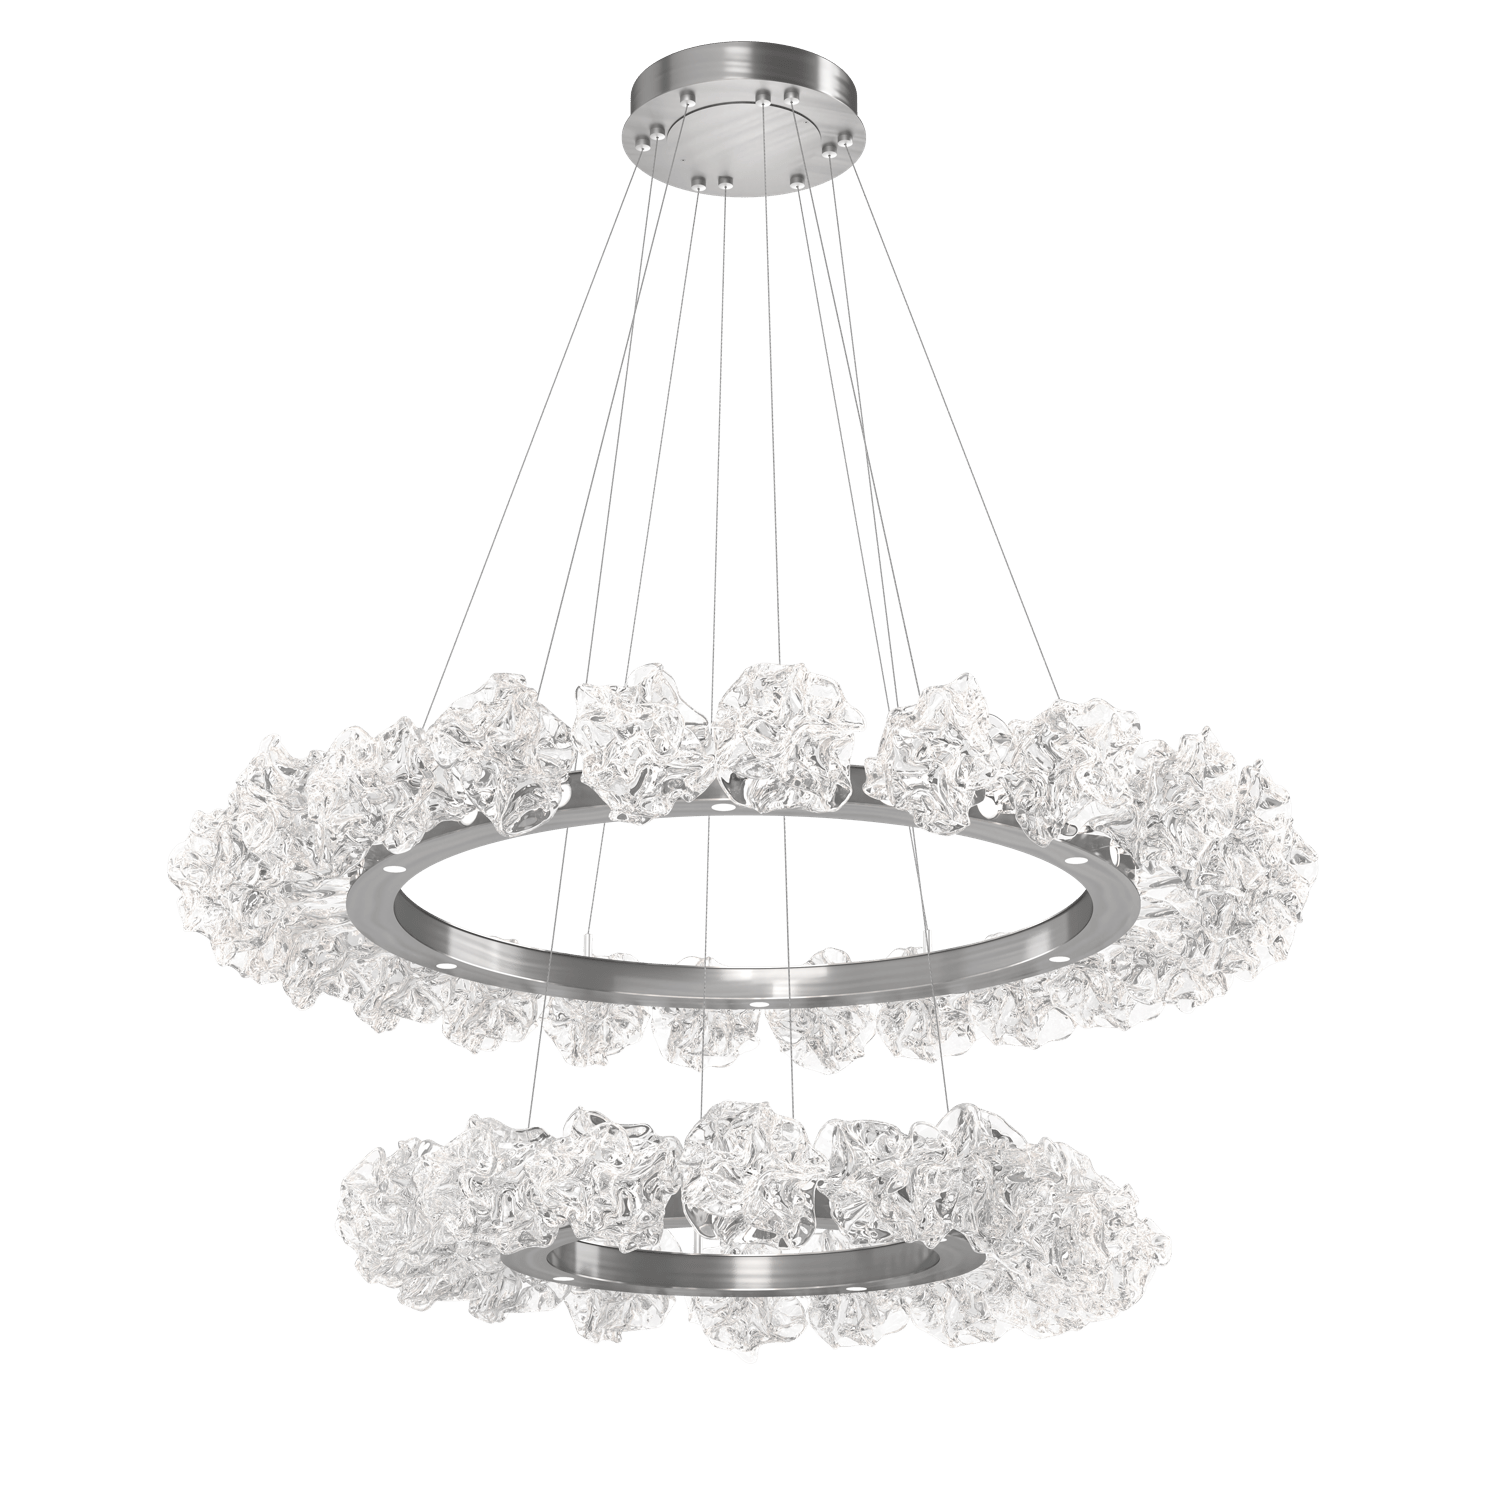 CHB0059-2B-SN-Hammerton-Studio-Blossom-50-inch-two-tier-radial-ring-chandelier-with-satin-nickel-finish-and-clear-handblown-crystal-glass-shades-and-LED-lamping